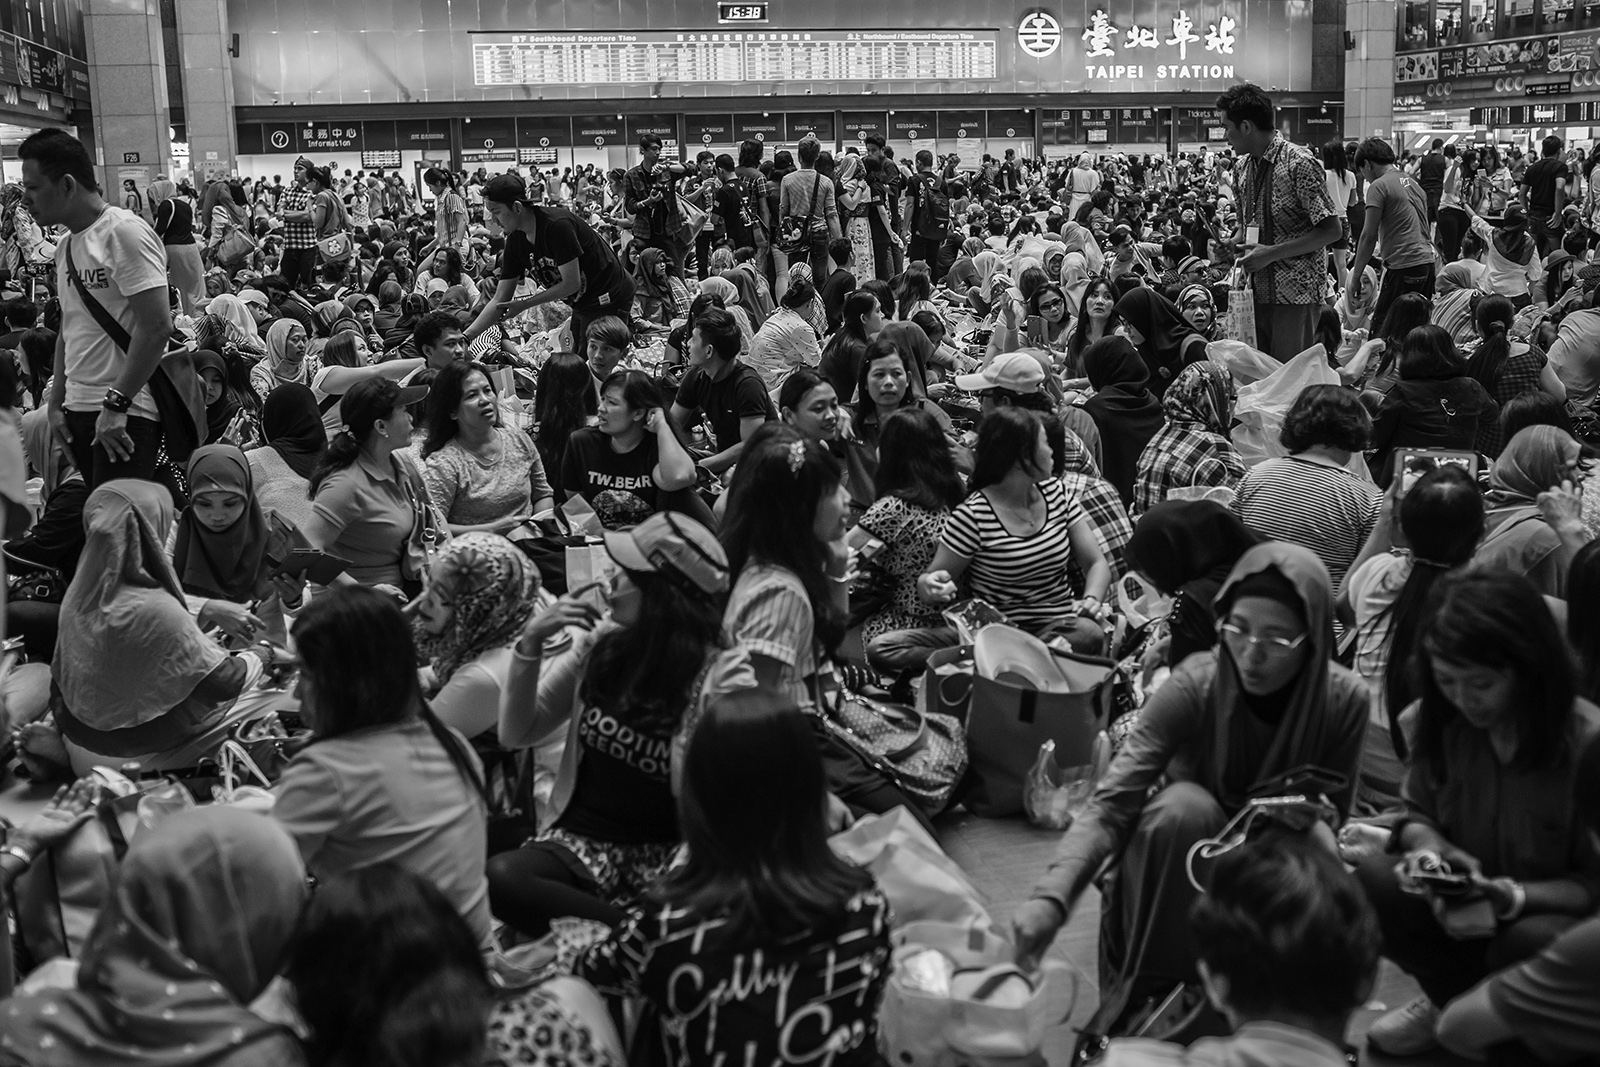 Thousands of Indonesian migrant workers gather at Taipei Main Station Sunday, July 19, 2015 to celebrate Hari Rayi Aidilfitri, the Muslim festival marking the end of Ramadan. There are over 200,000 migrant workers from Indonesia living in Taiwan, making them the largest group of migrant workers in Taiwan.